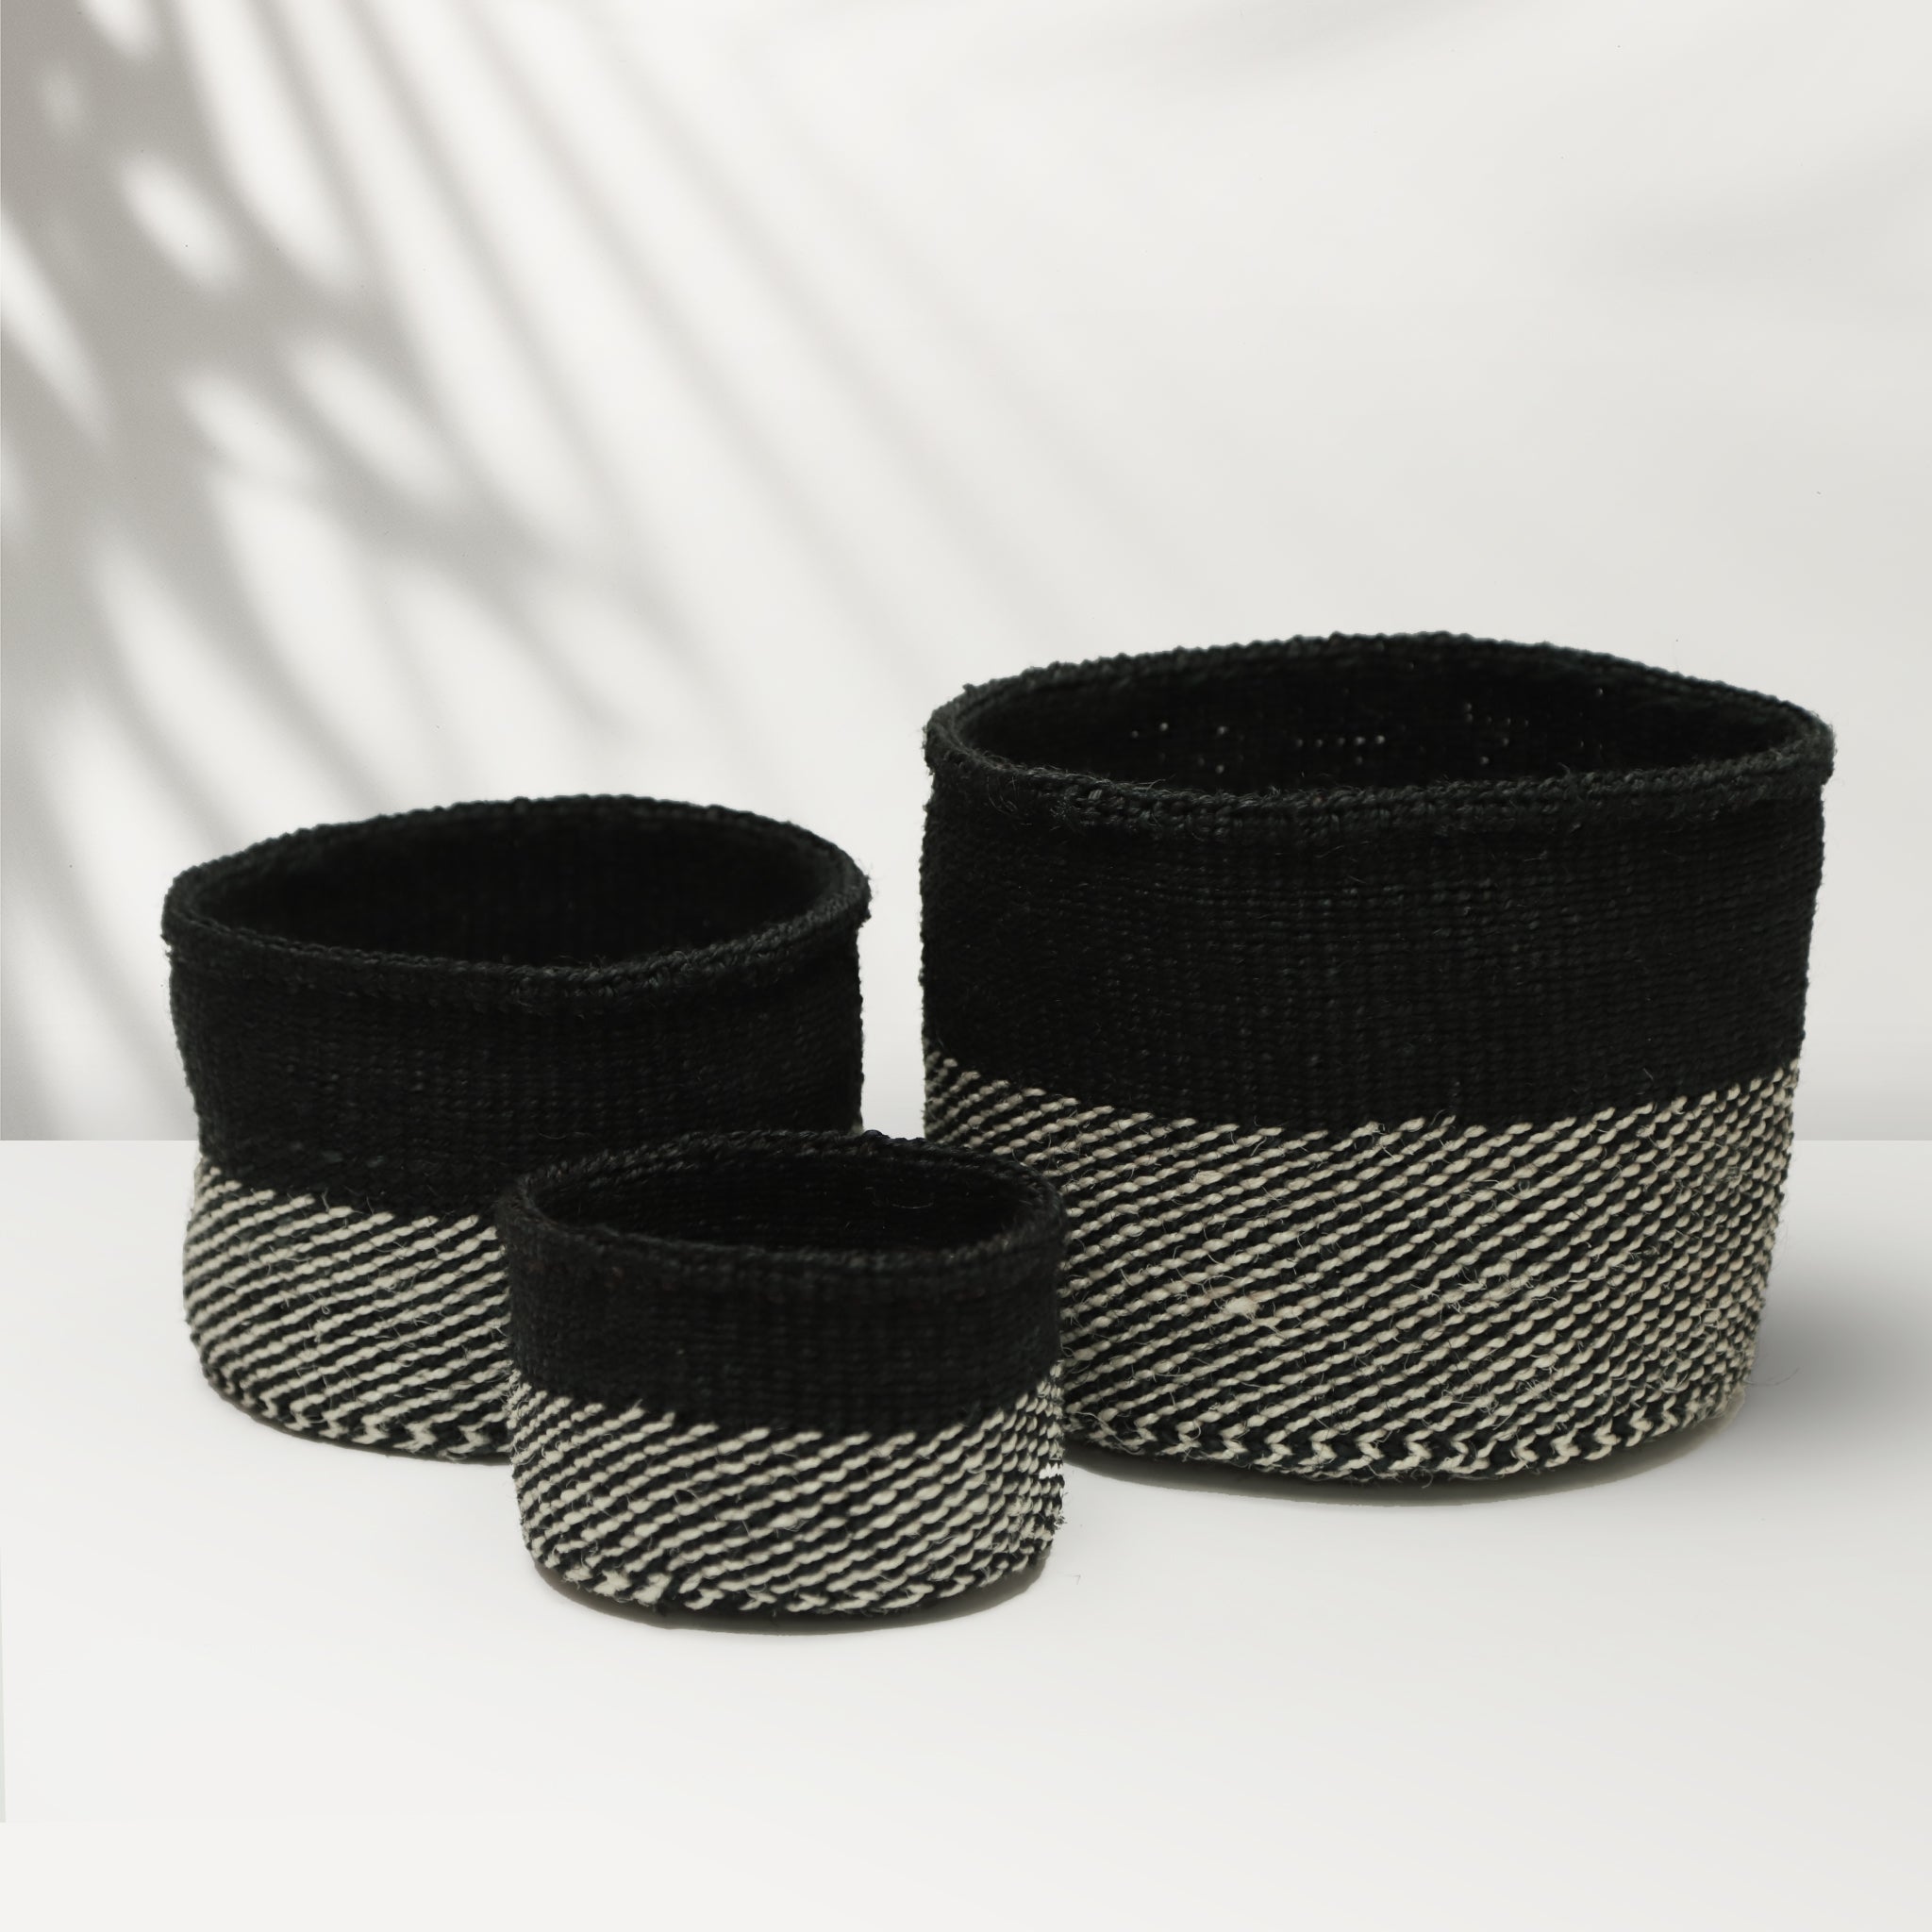 GARDENING BASKET, SISAL Basket, Black And White Natural Dye Woven Handmade Storage Basket With Cover, Gifts For Home